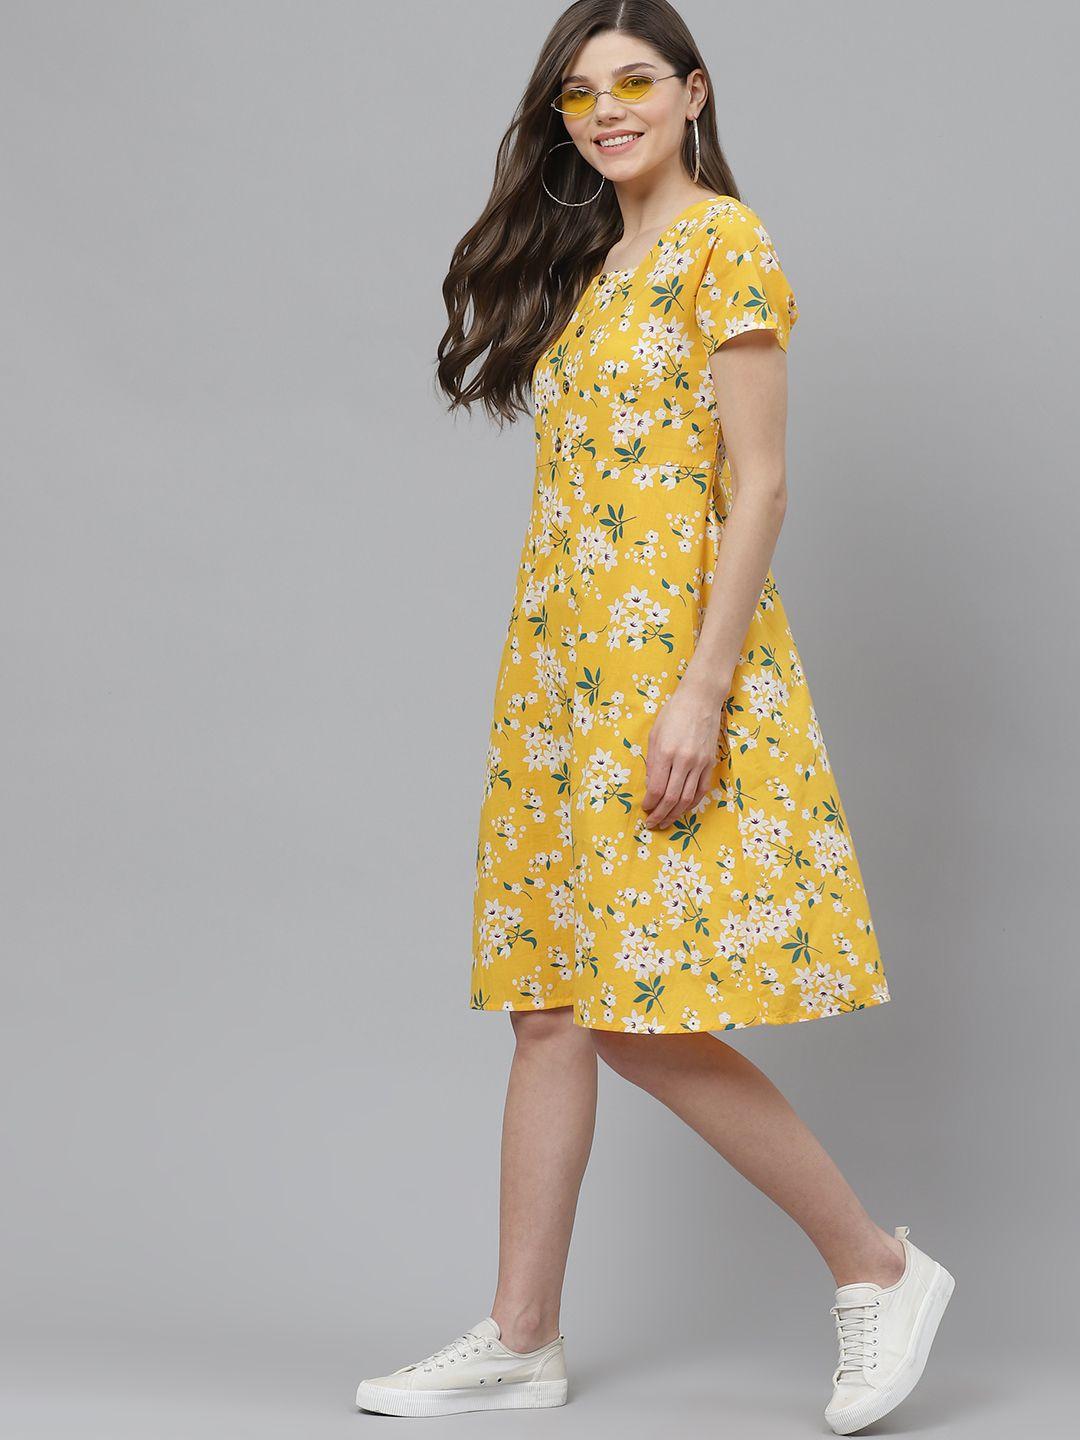 here&now women yellow & white printed pure cotton a-line dress